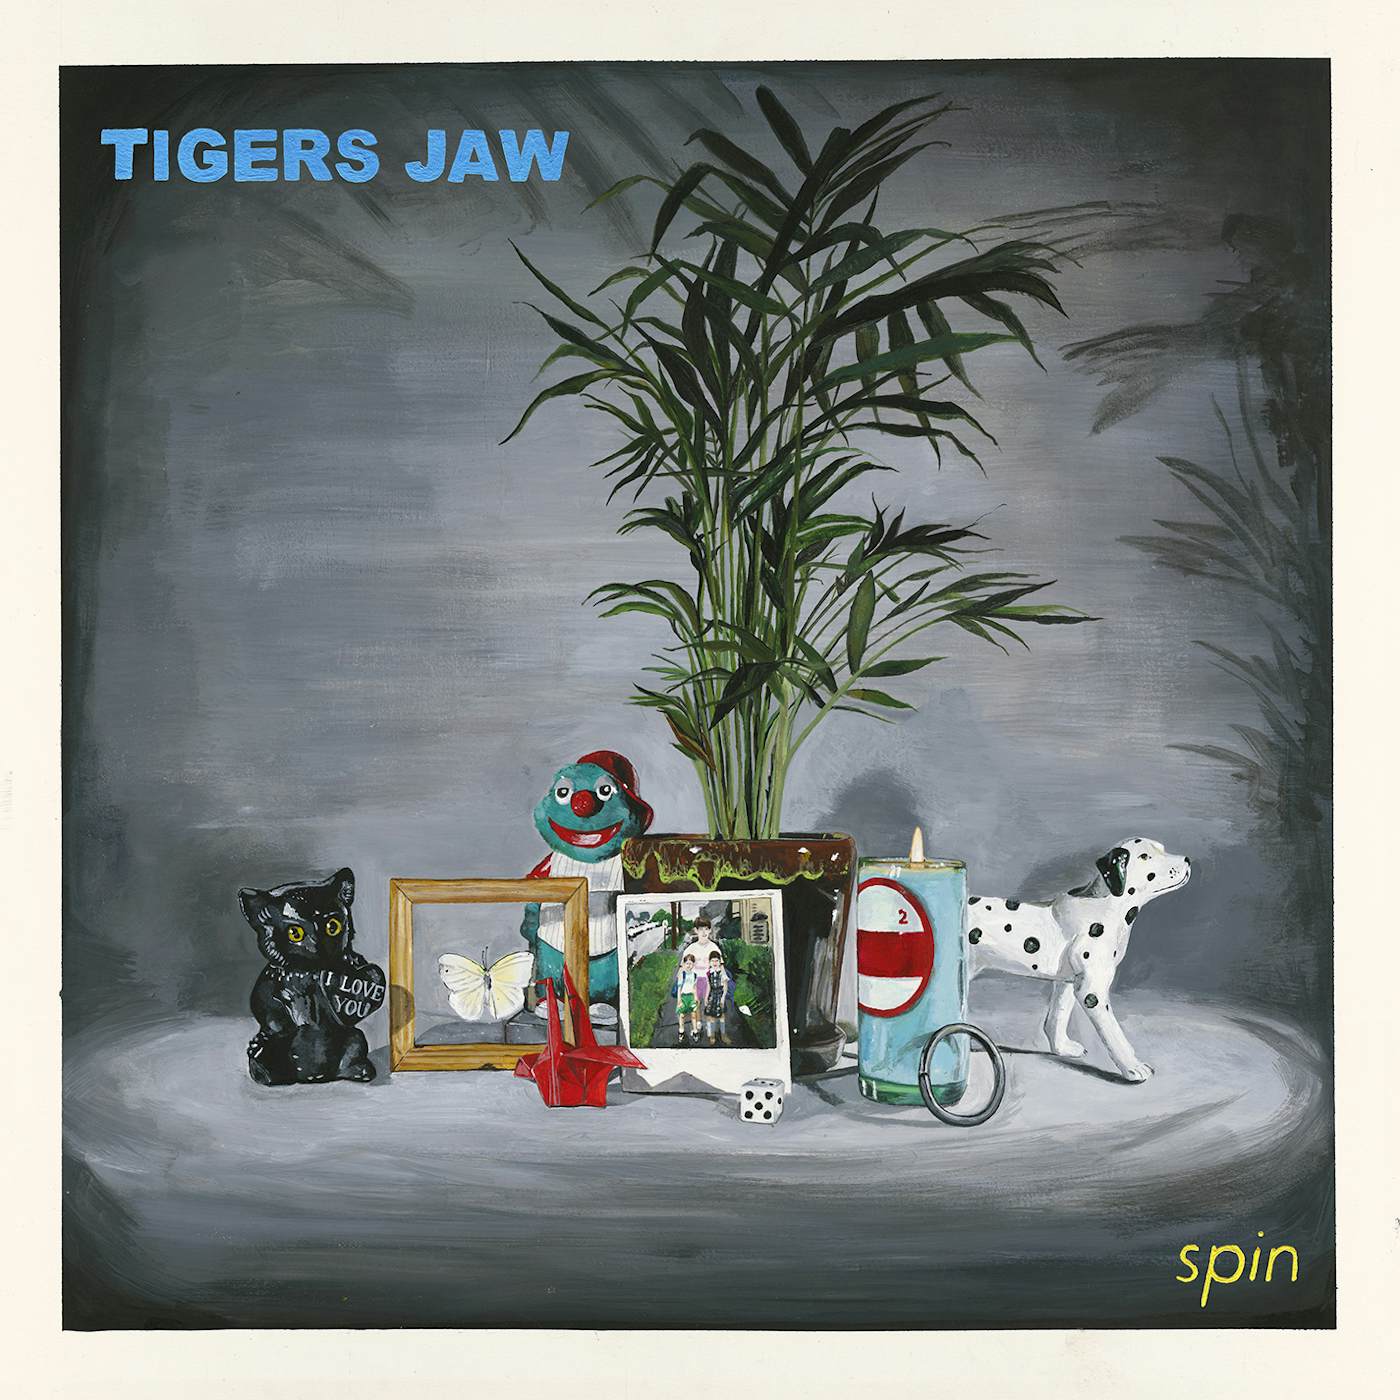 Tigers Jaw spin Vinyl Record